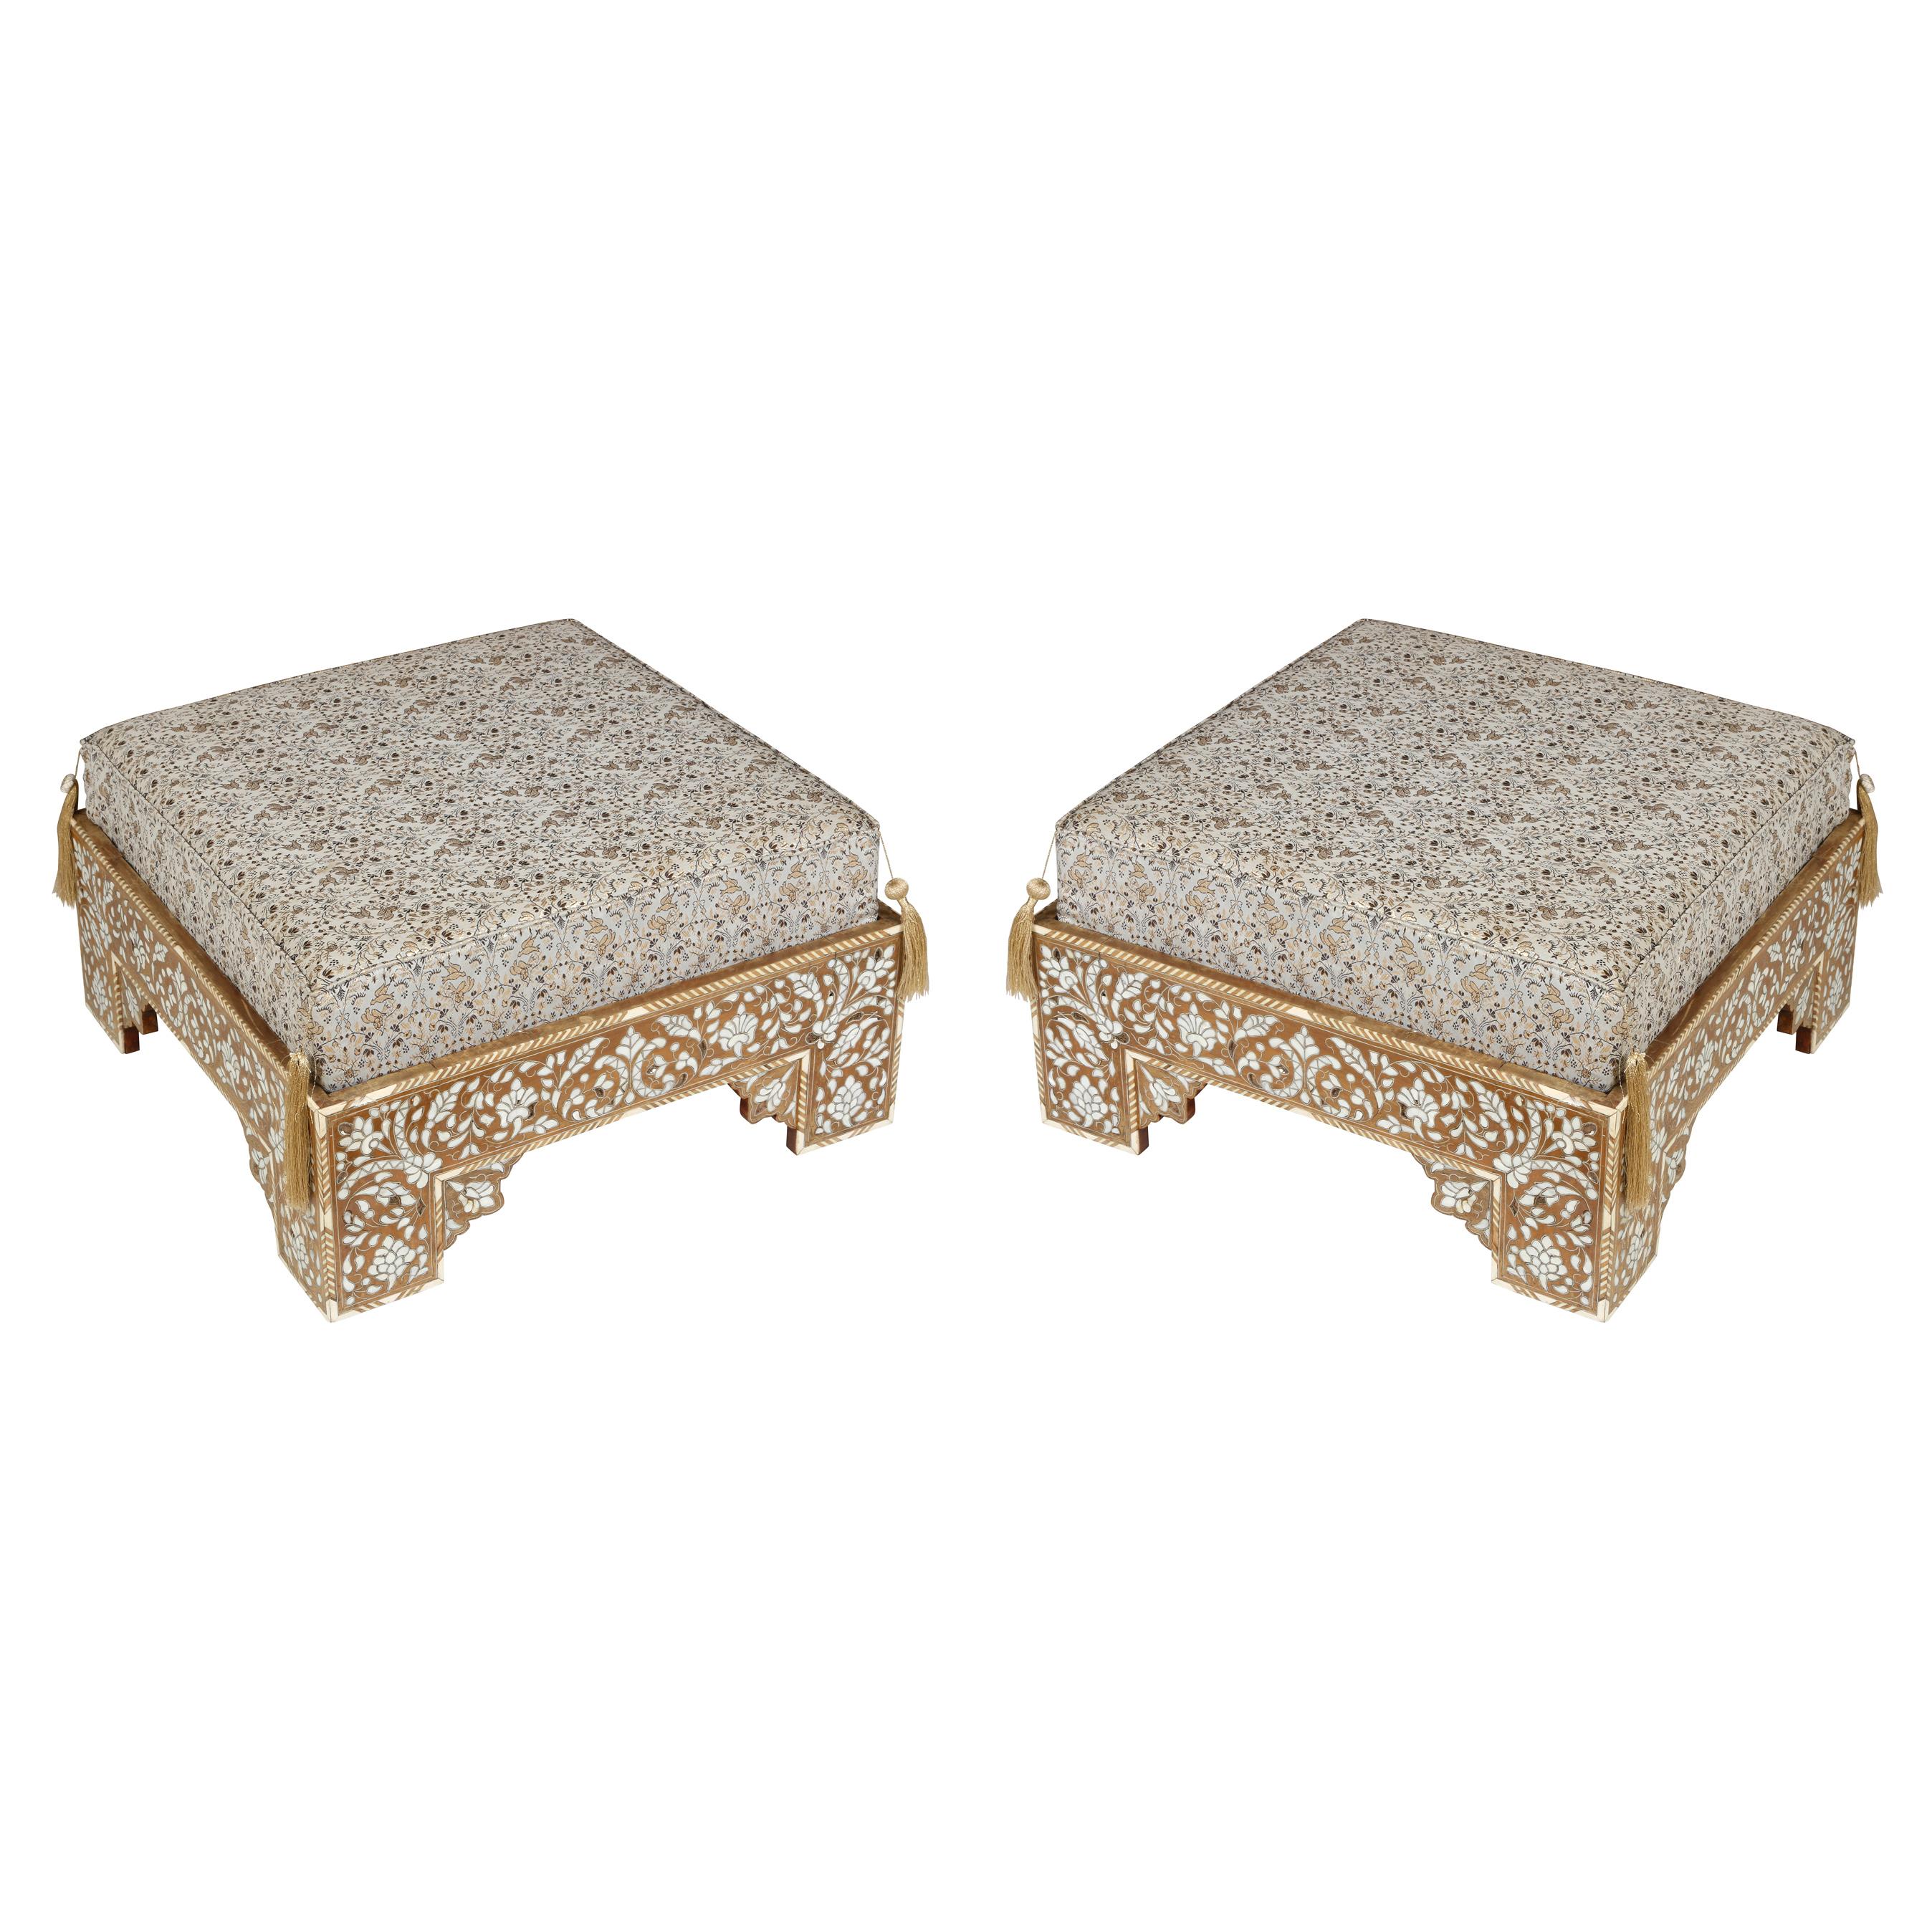 20th Century Pair of Moroccan Style Inlaid Square Ottomans